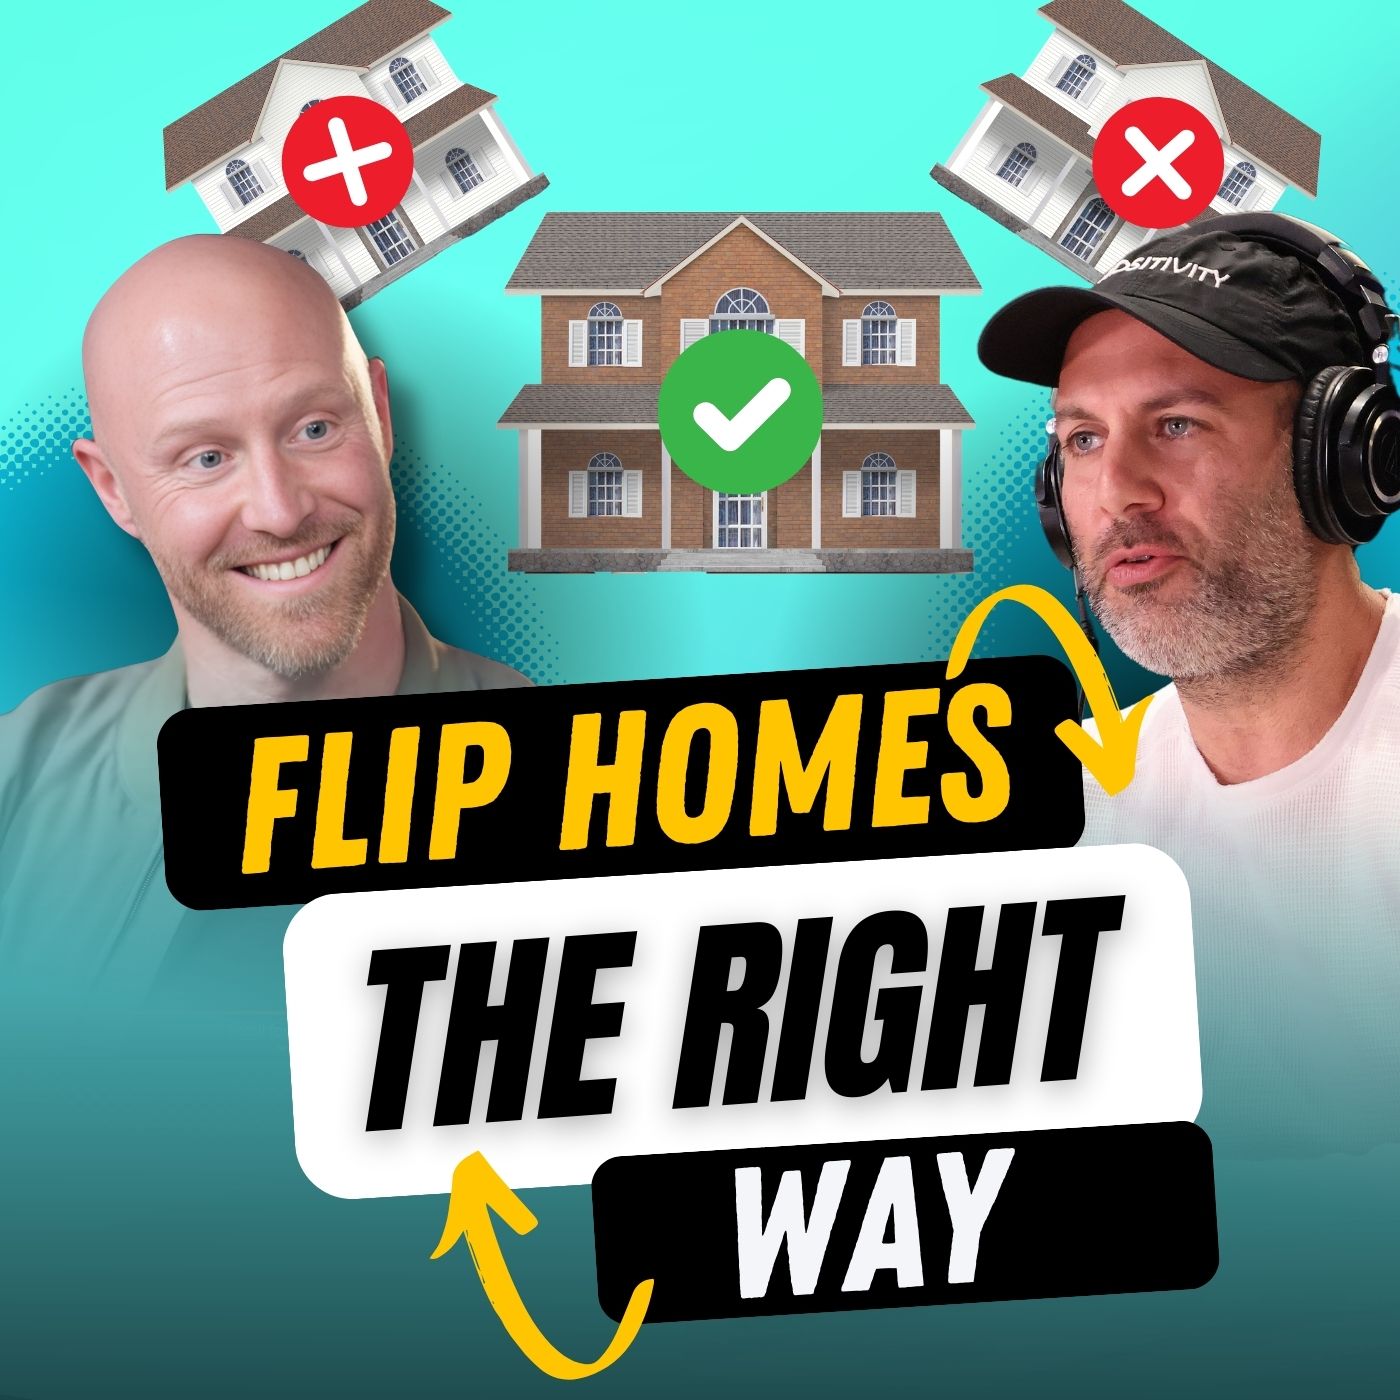 How to Flip Homes the RIGHT Way with Justin Colby